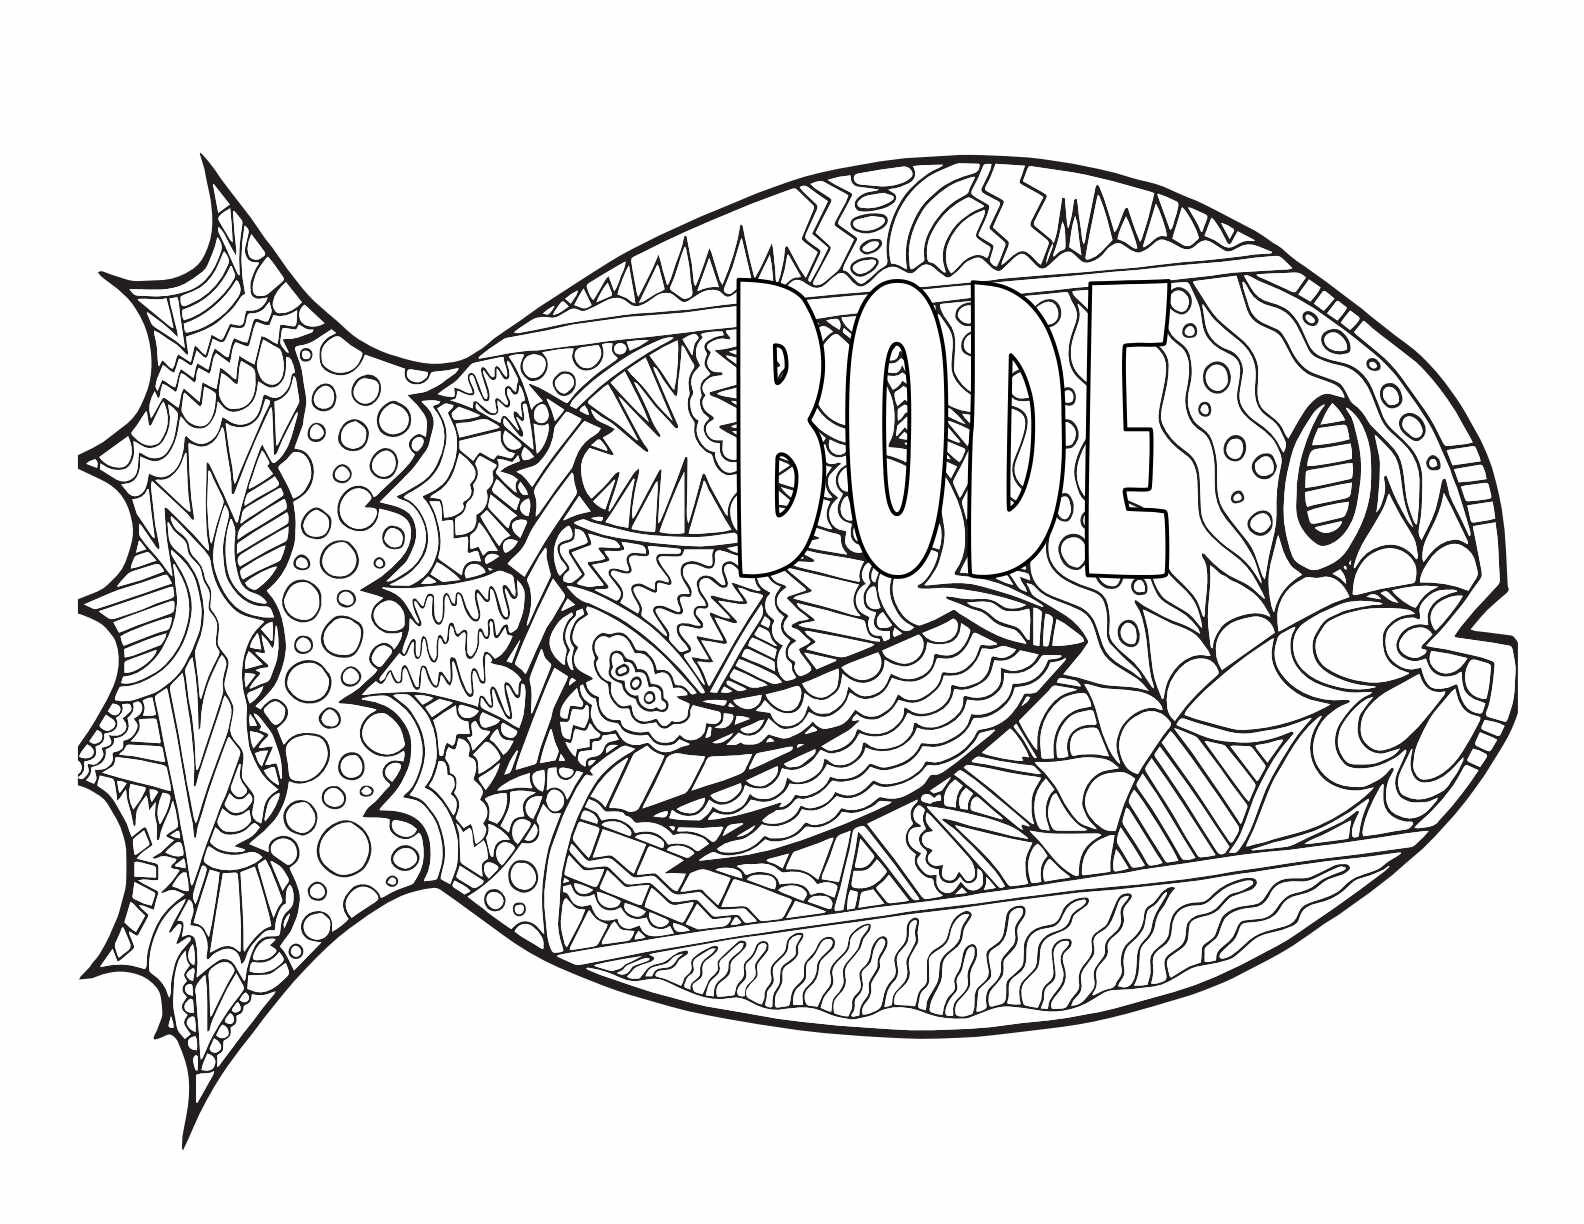 3 FREE BODE PRINTABLE COLORING PAGES CLICK HERE TO DOWNLOAD THE PAGE ABOVE